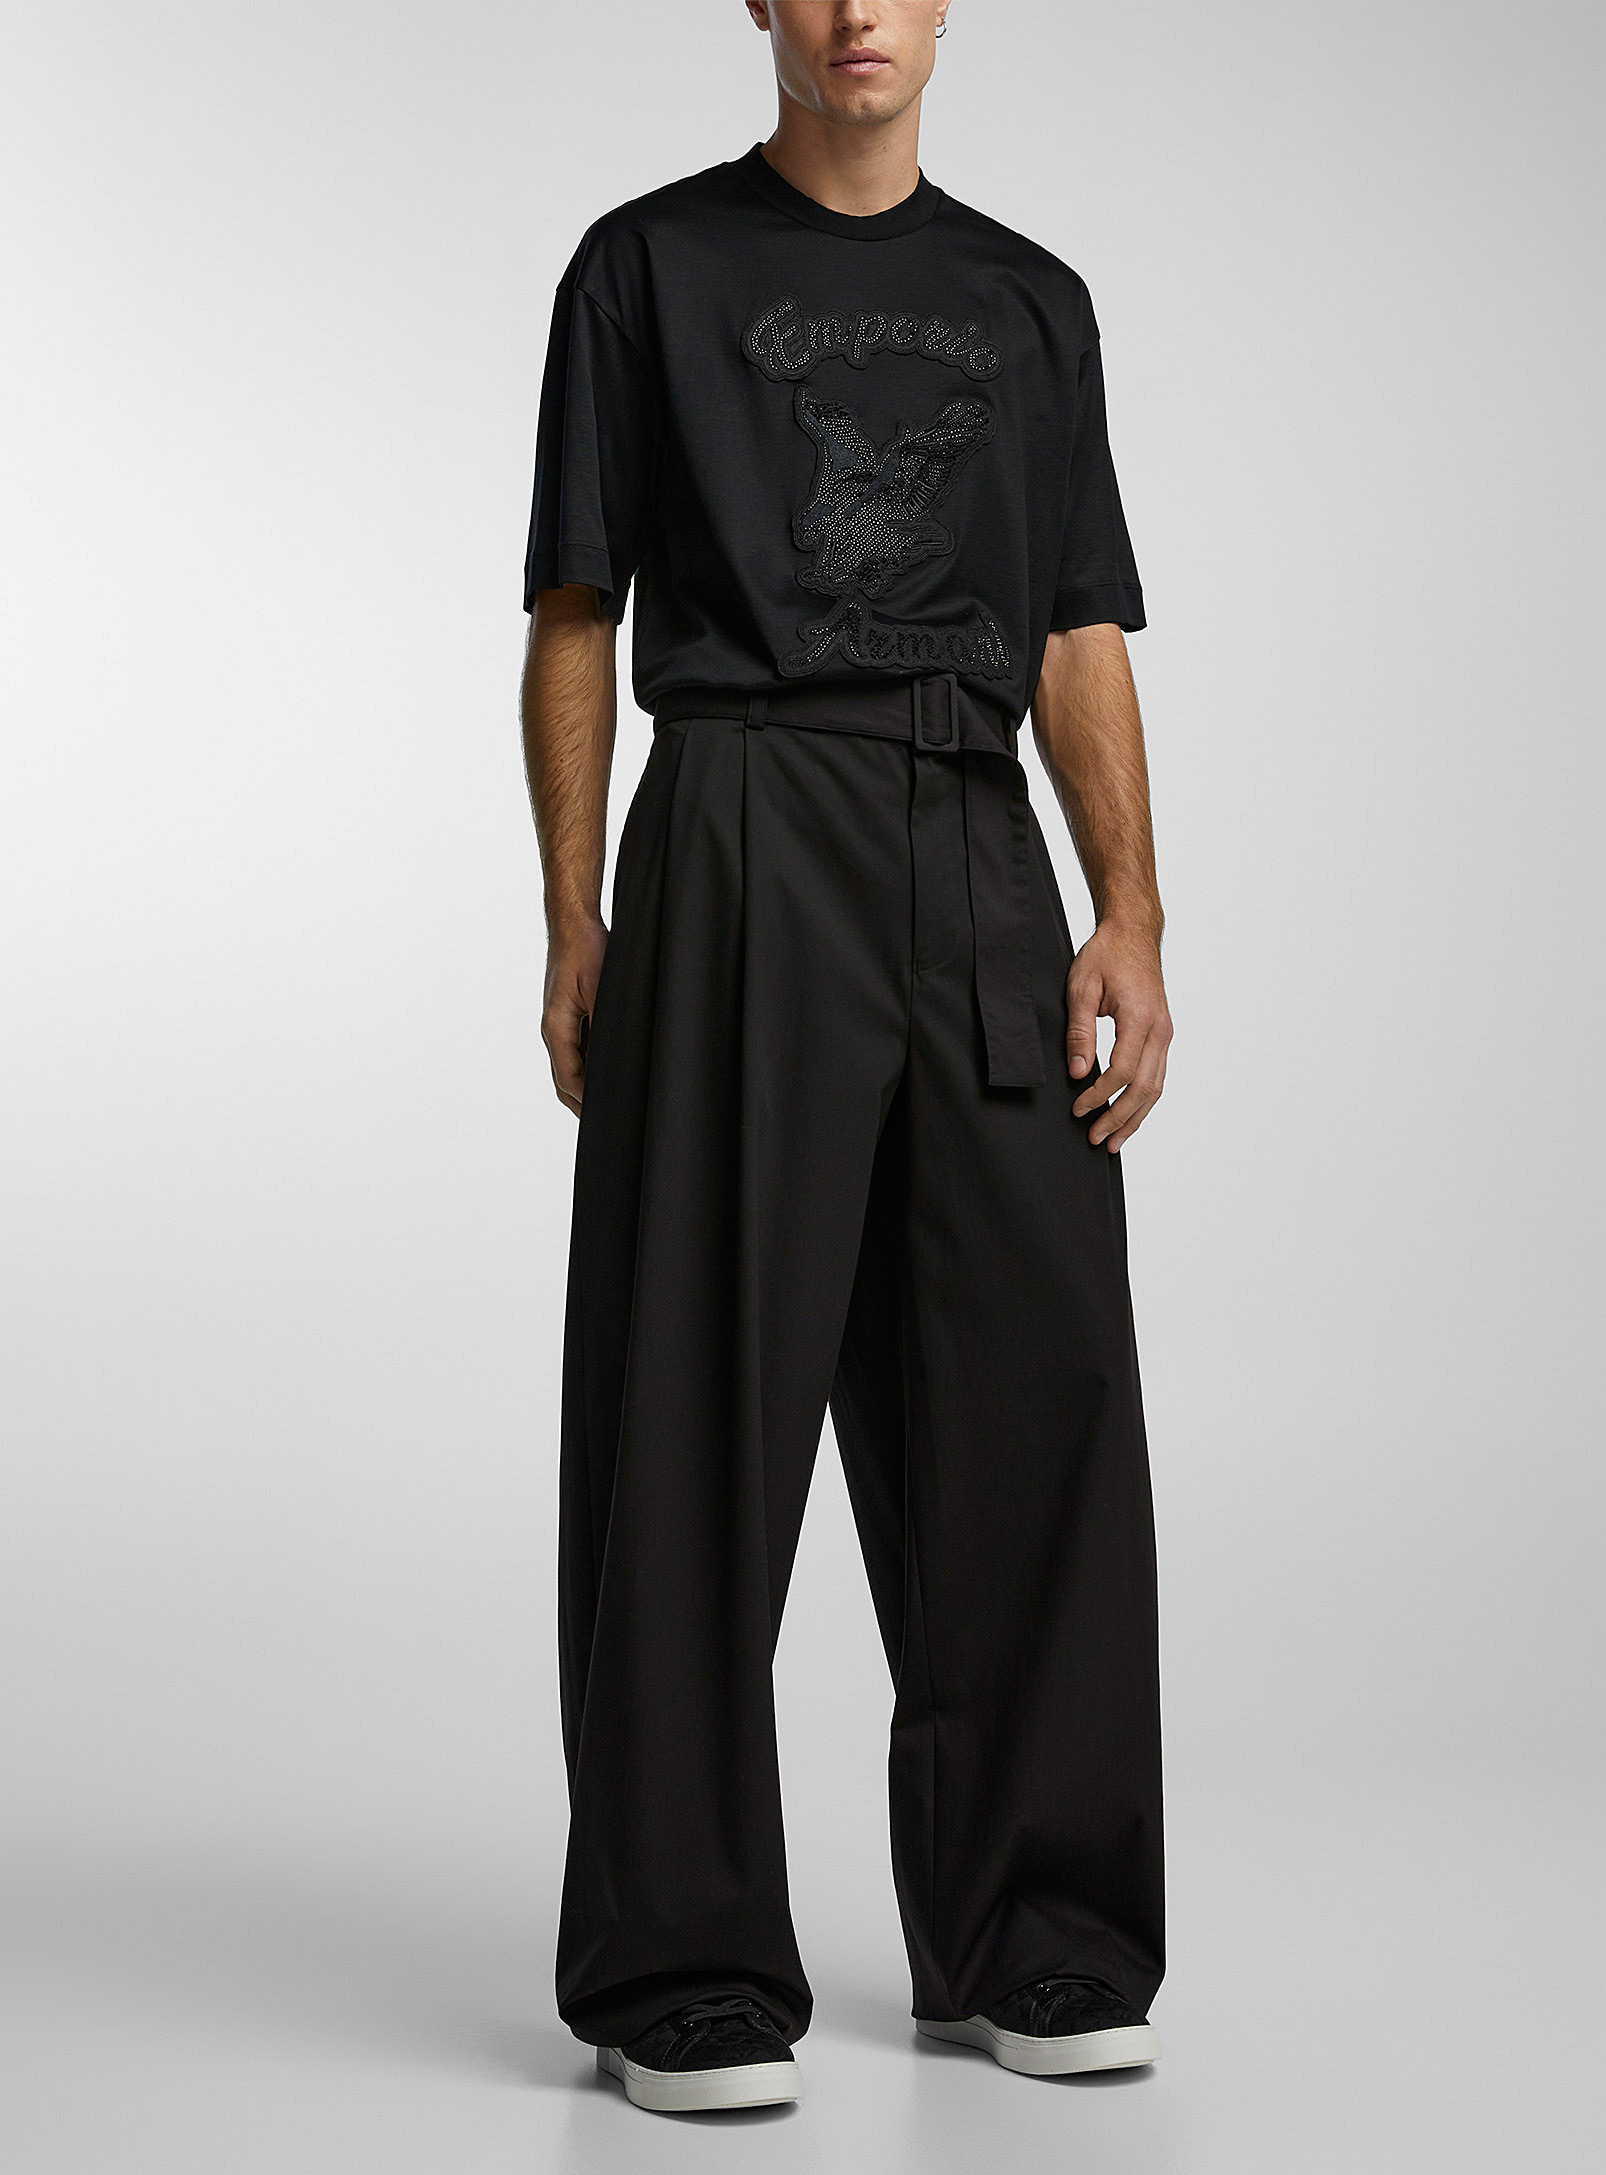 Emporio Armani - Men's Belted wide-leg pant